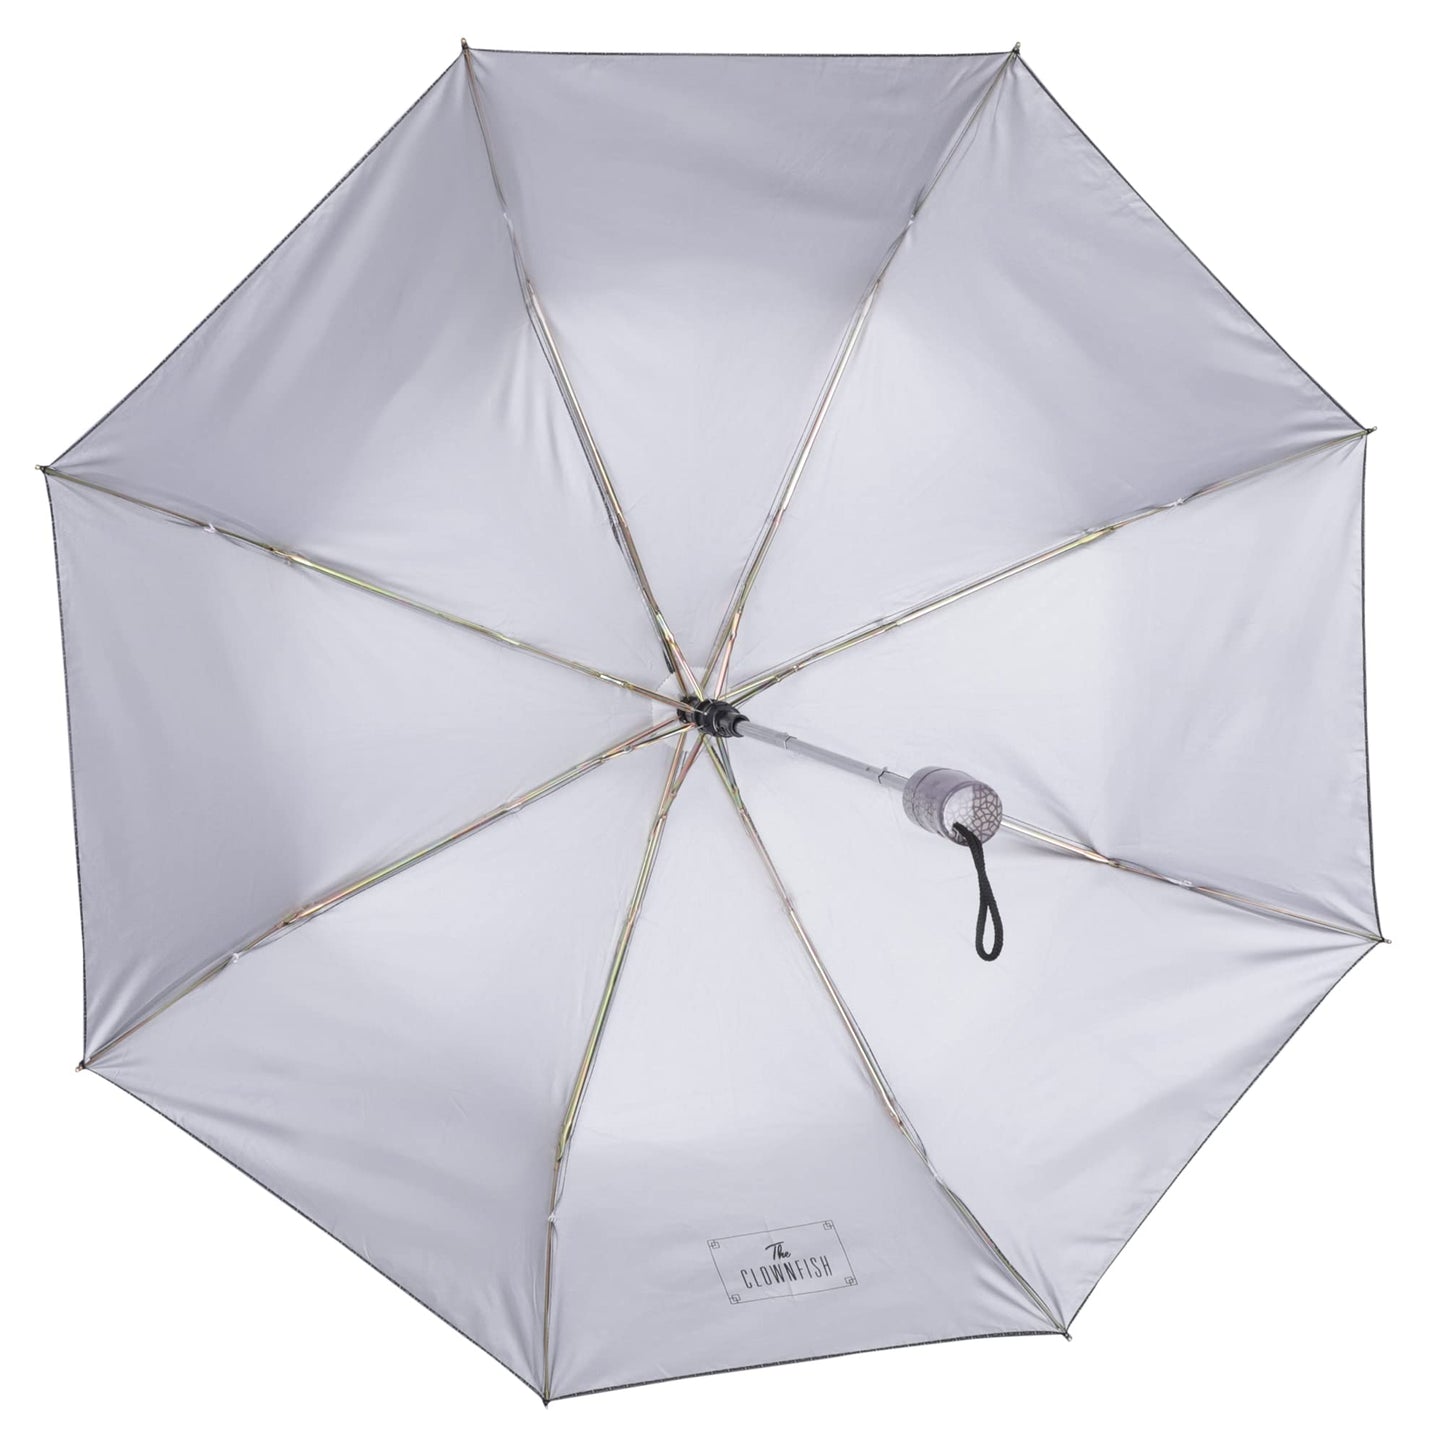 THE CLOWNFISH Umbrella 3 Fold Auto Open Waterproof Pongee Double Coated Silver Lined Umbrellas For Men and Women (Checks Design- Grey)